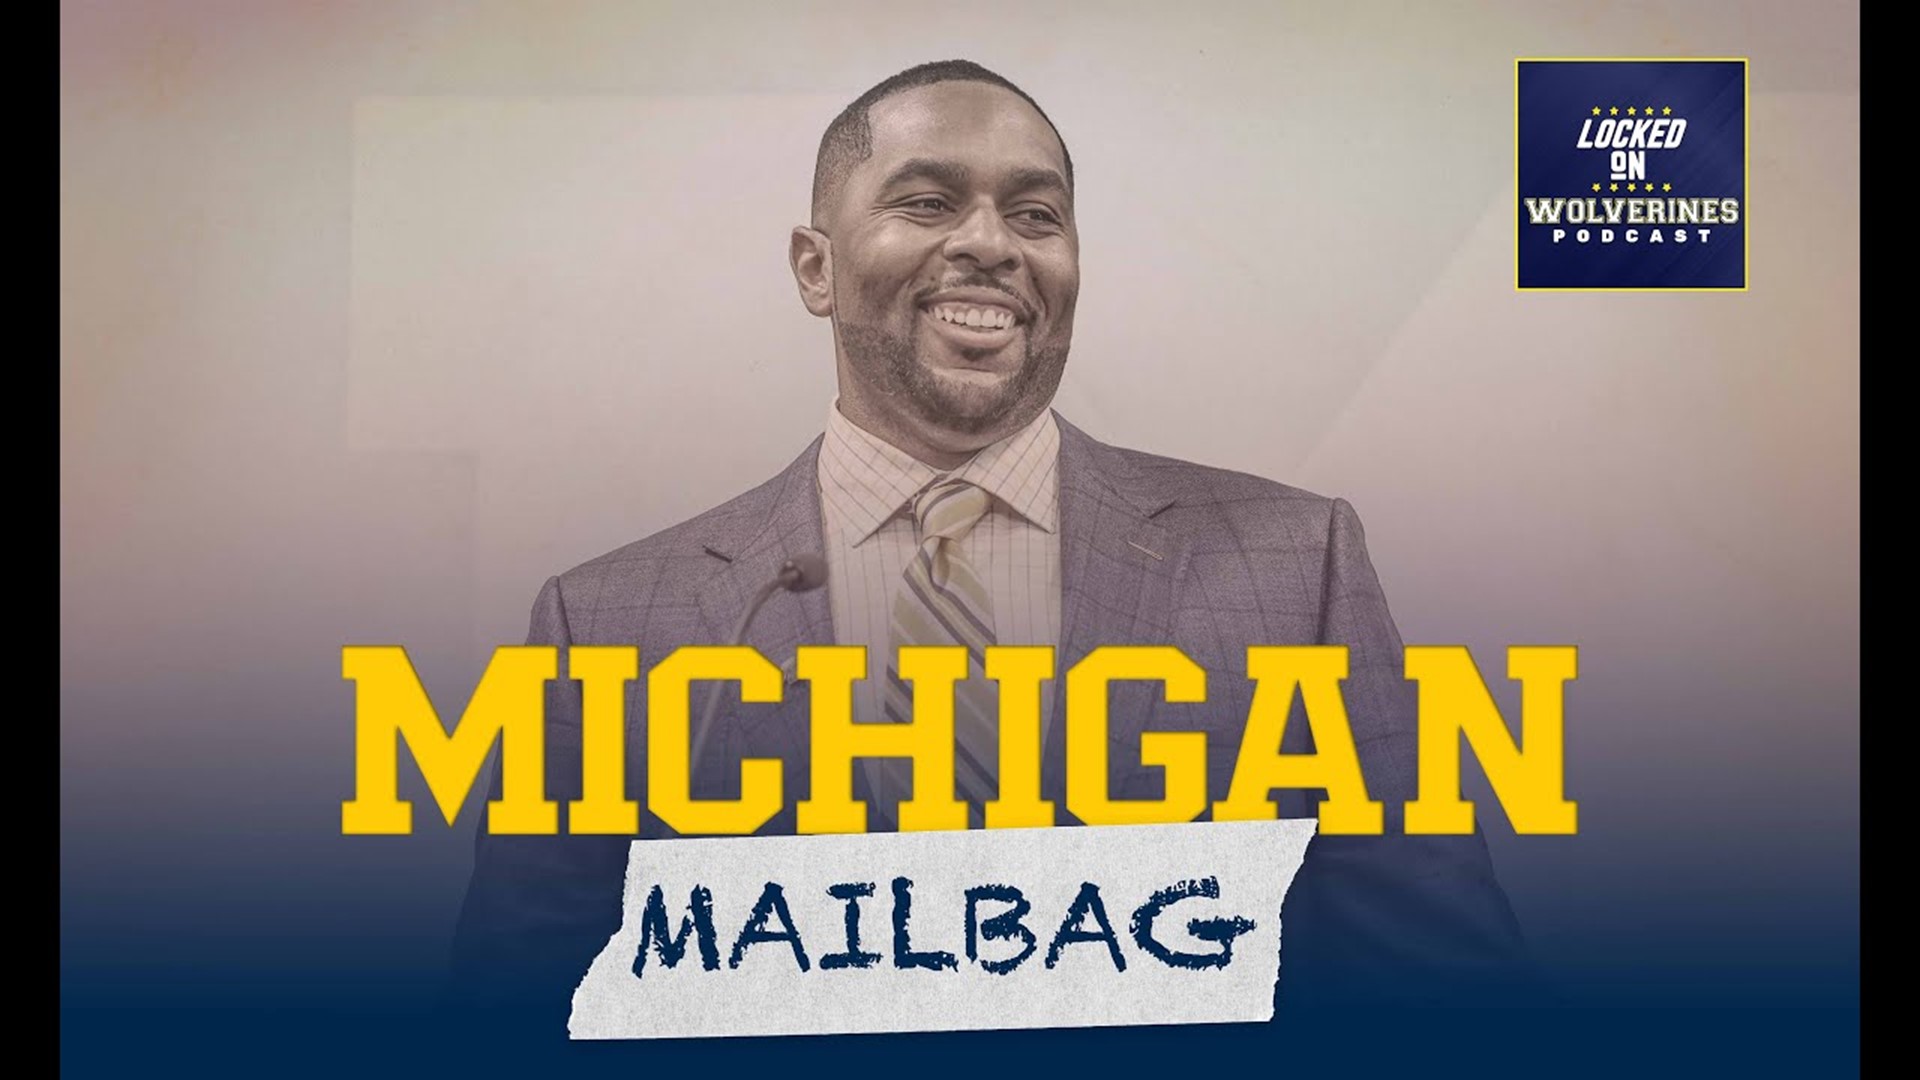 Michigan Mailbag is excited about the spring game but nervous about recruiting